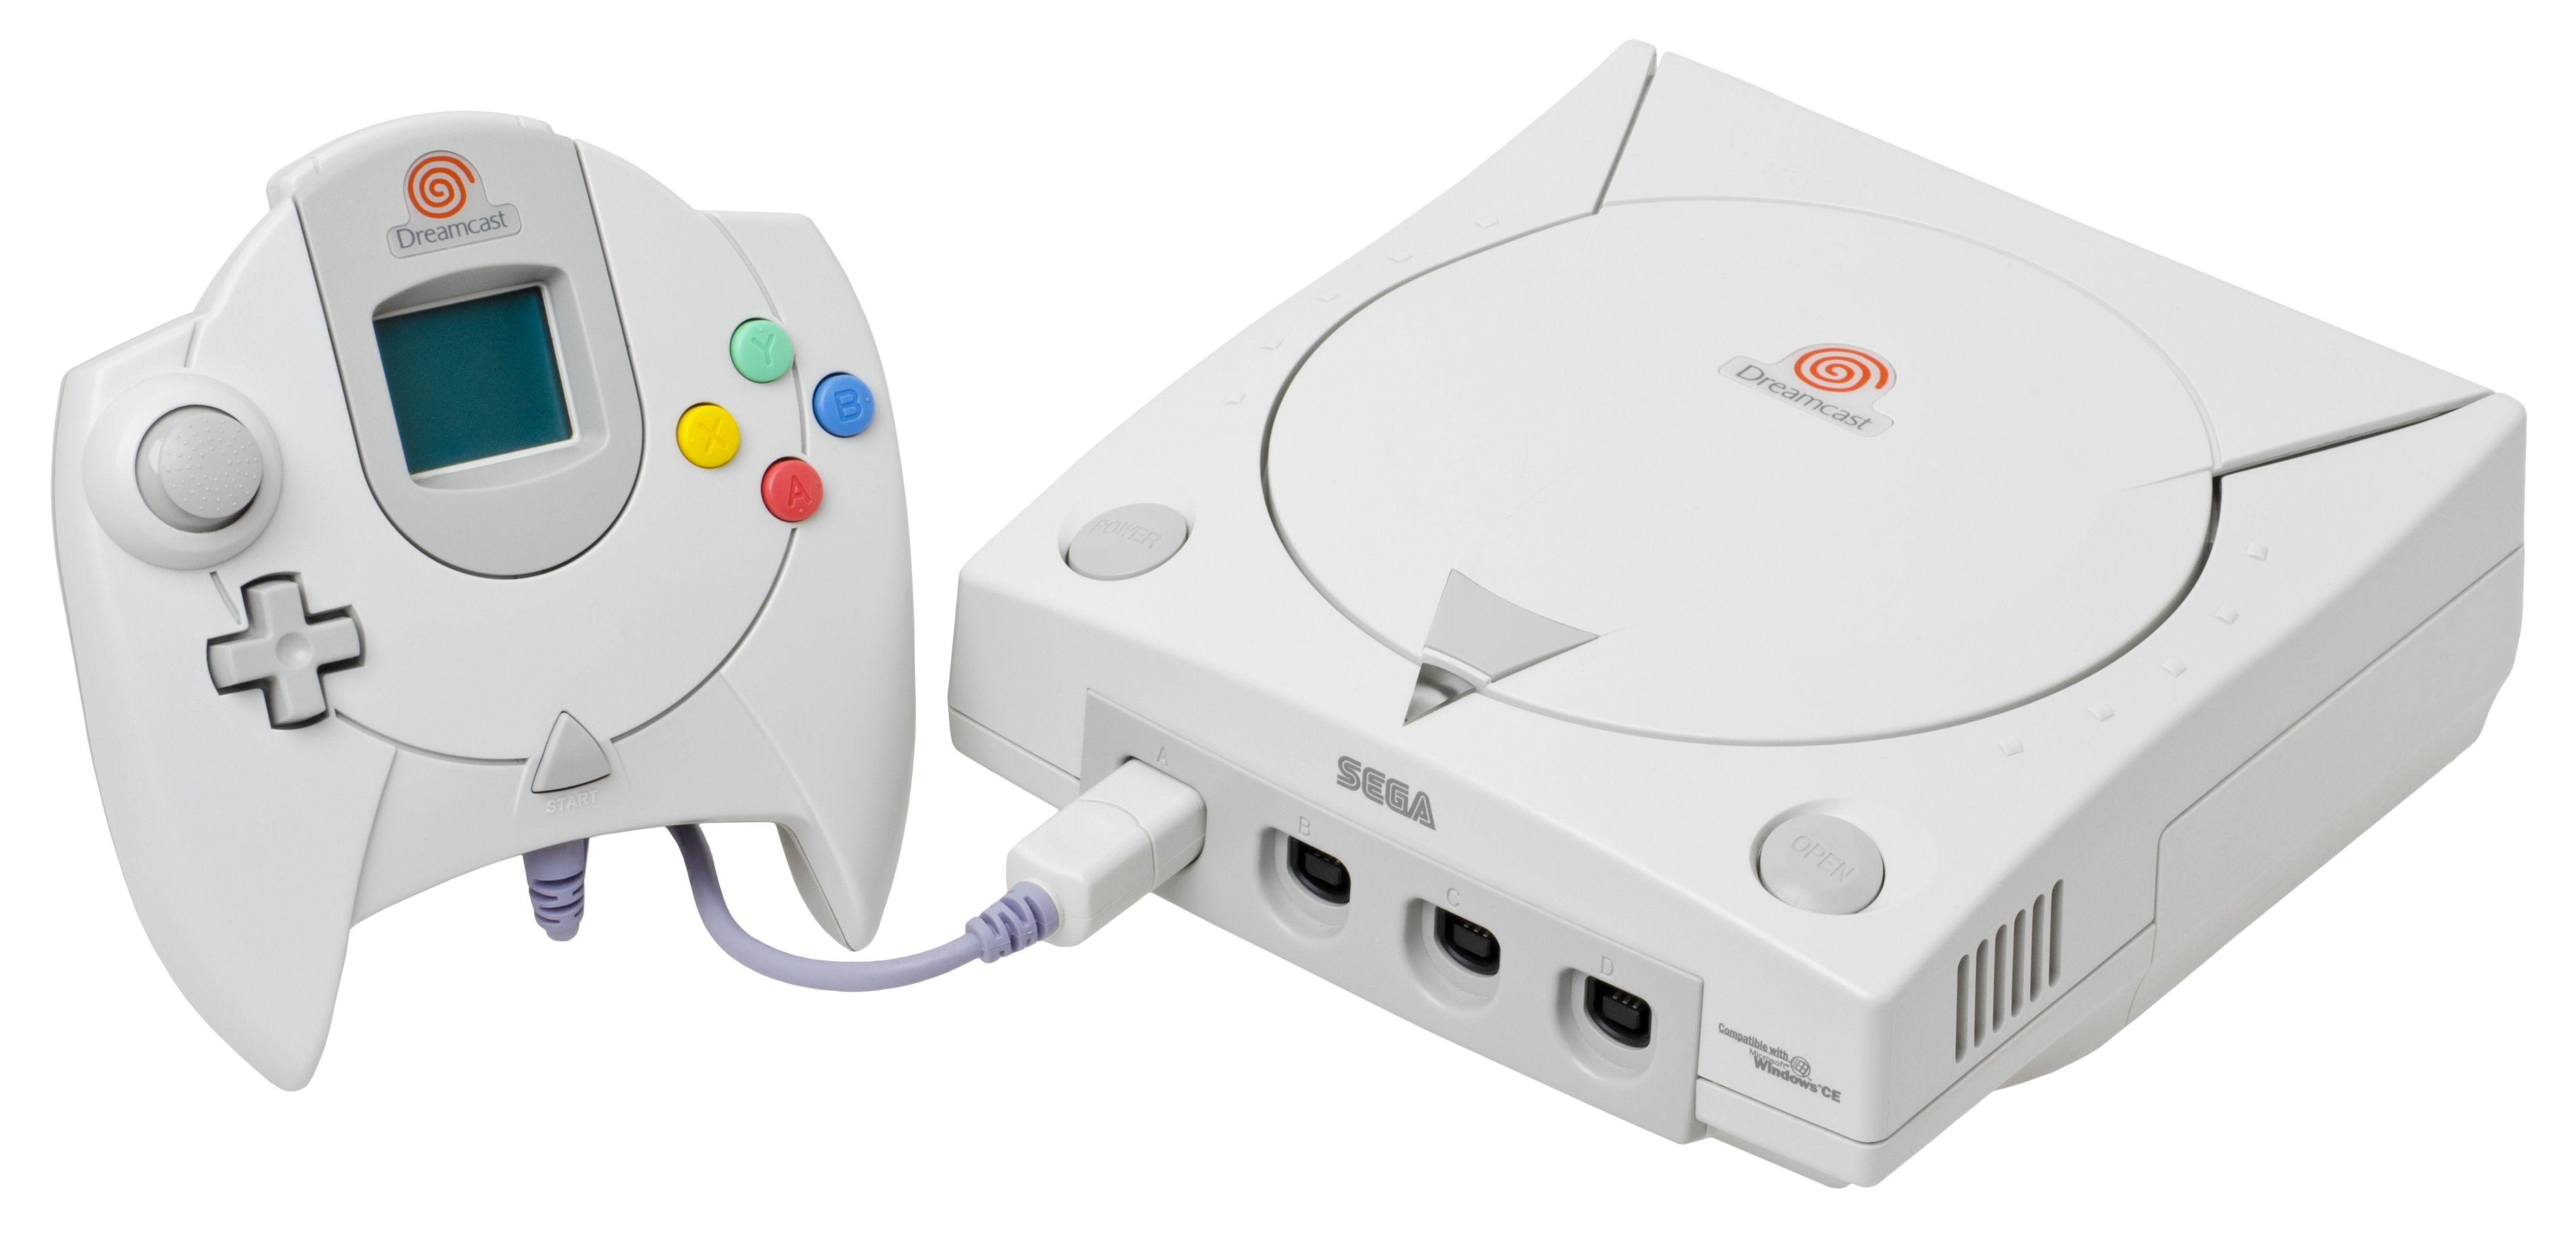 Dreamcast HD Wallpaper and Background Image